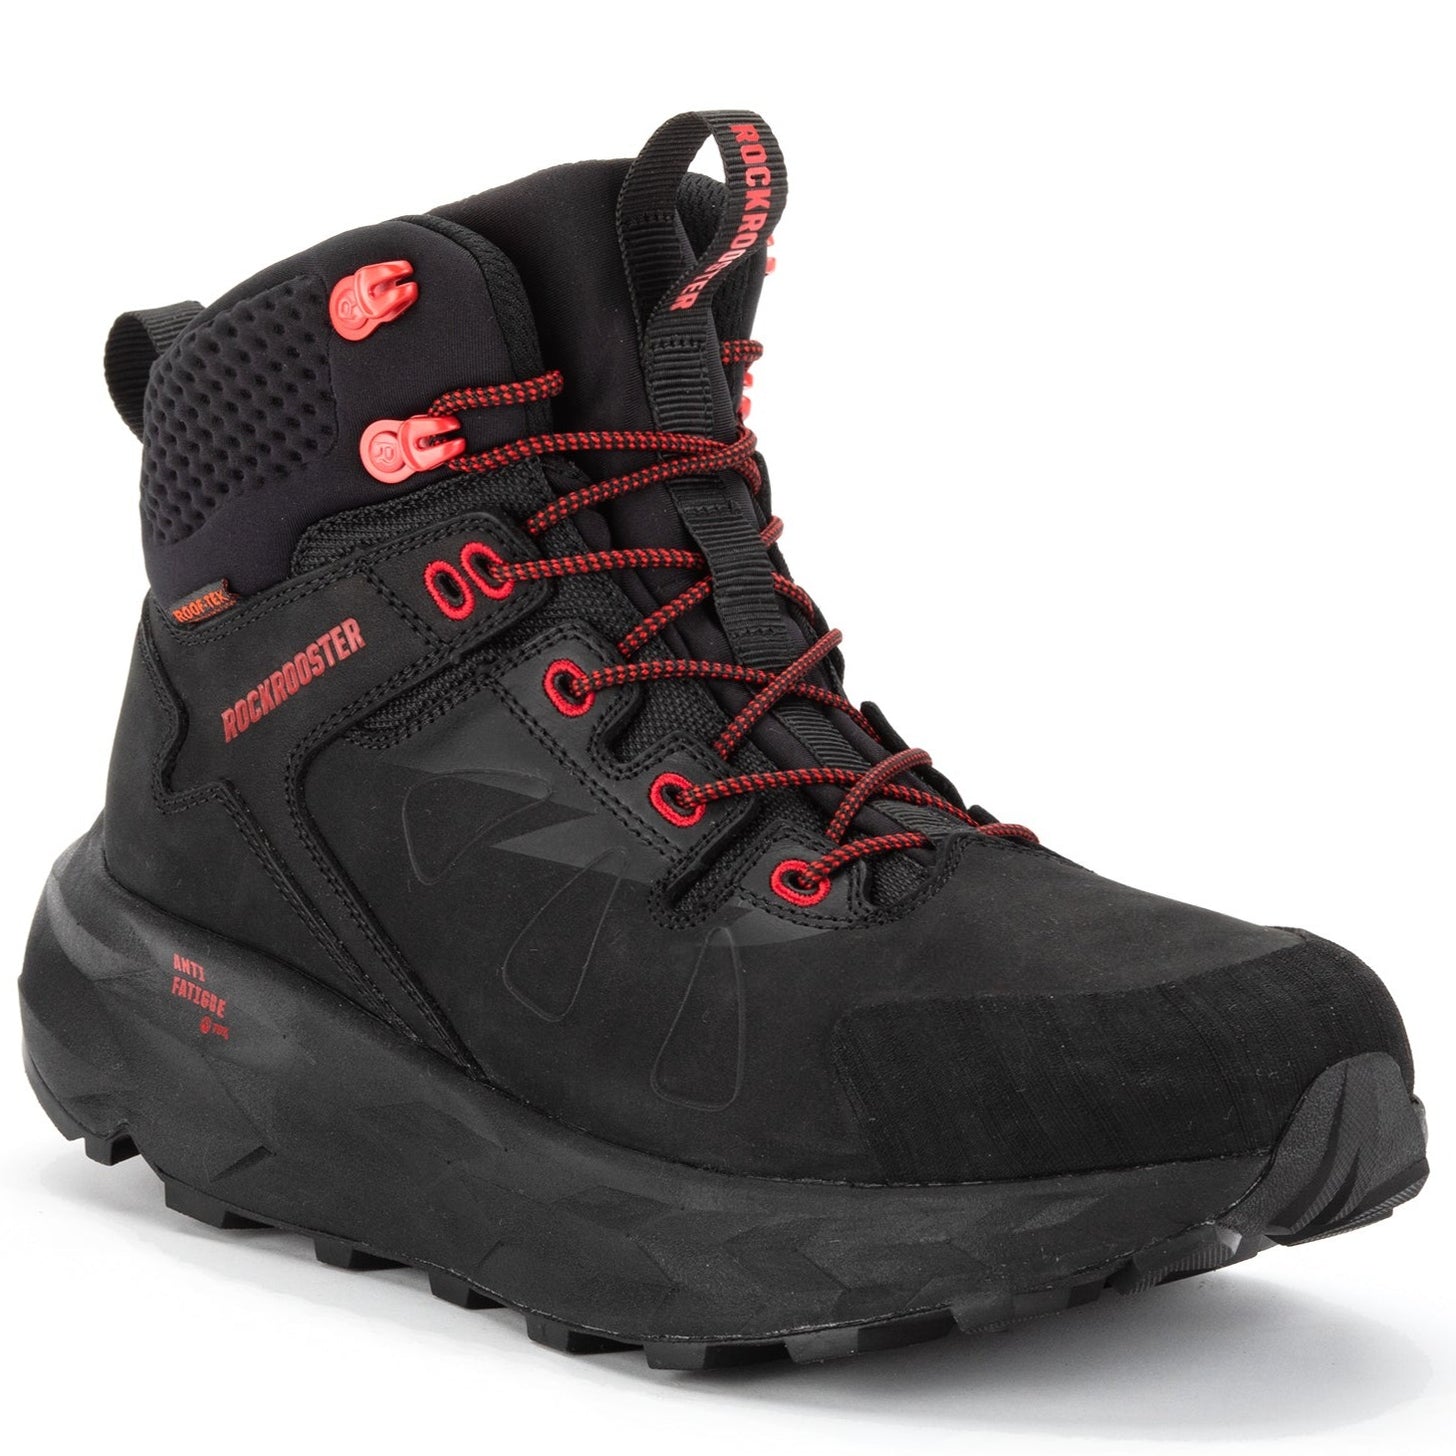 ROCKROOSTER Farmington Black 6 Inch Waterproof Hiking Boots with VIBRA ...